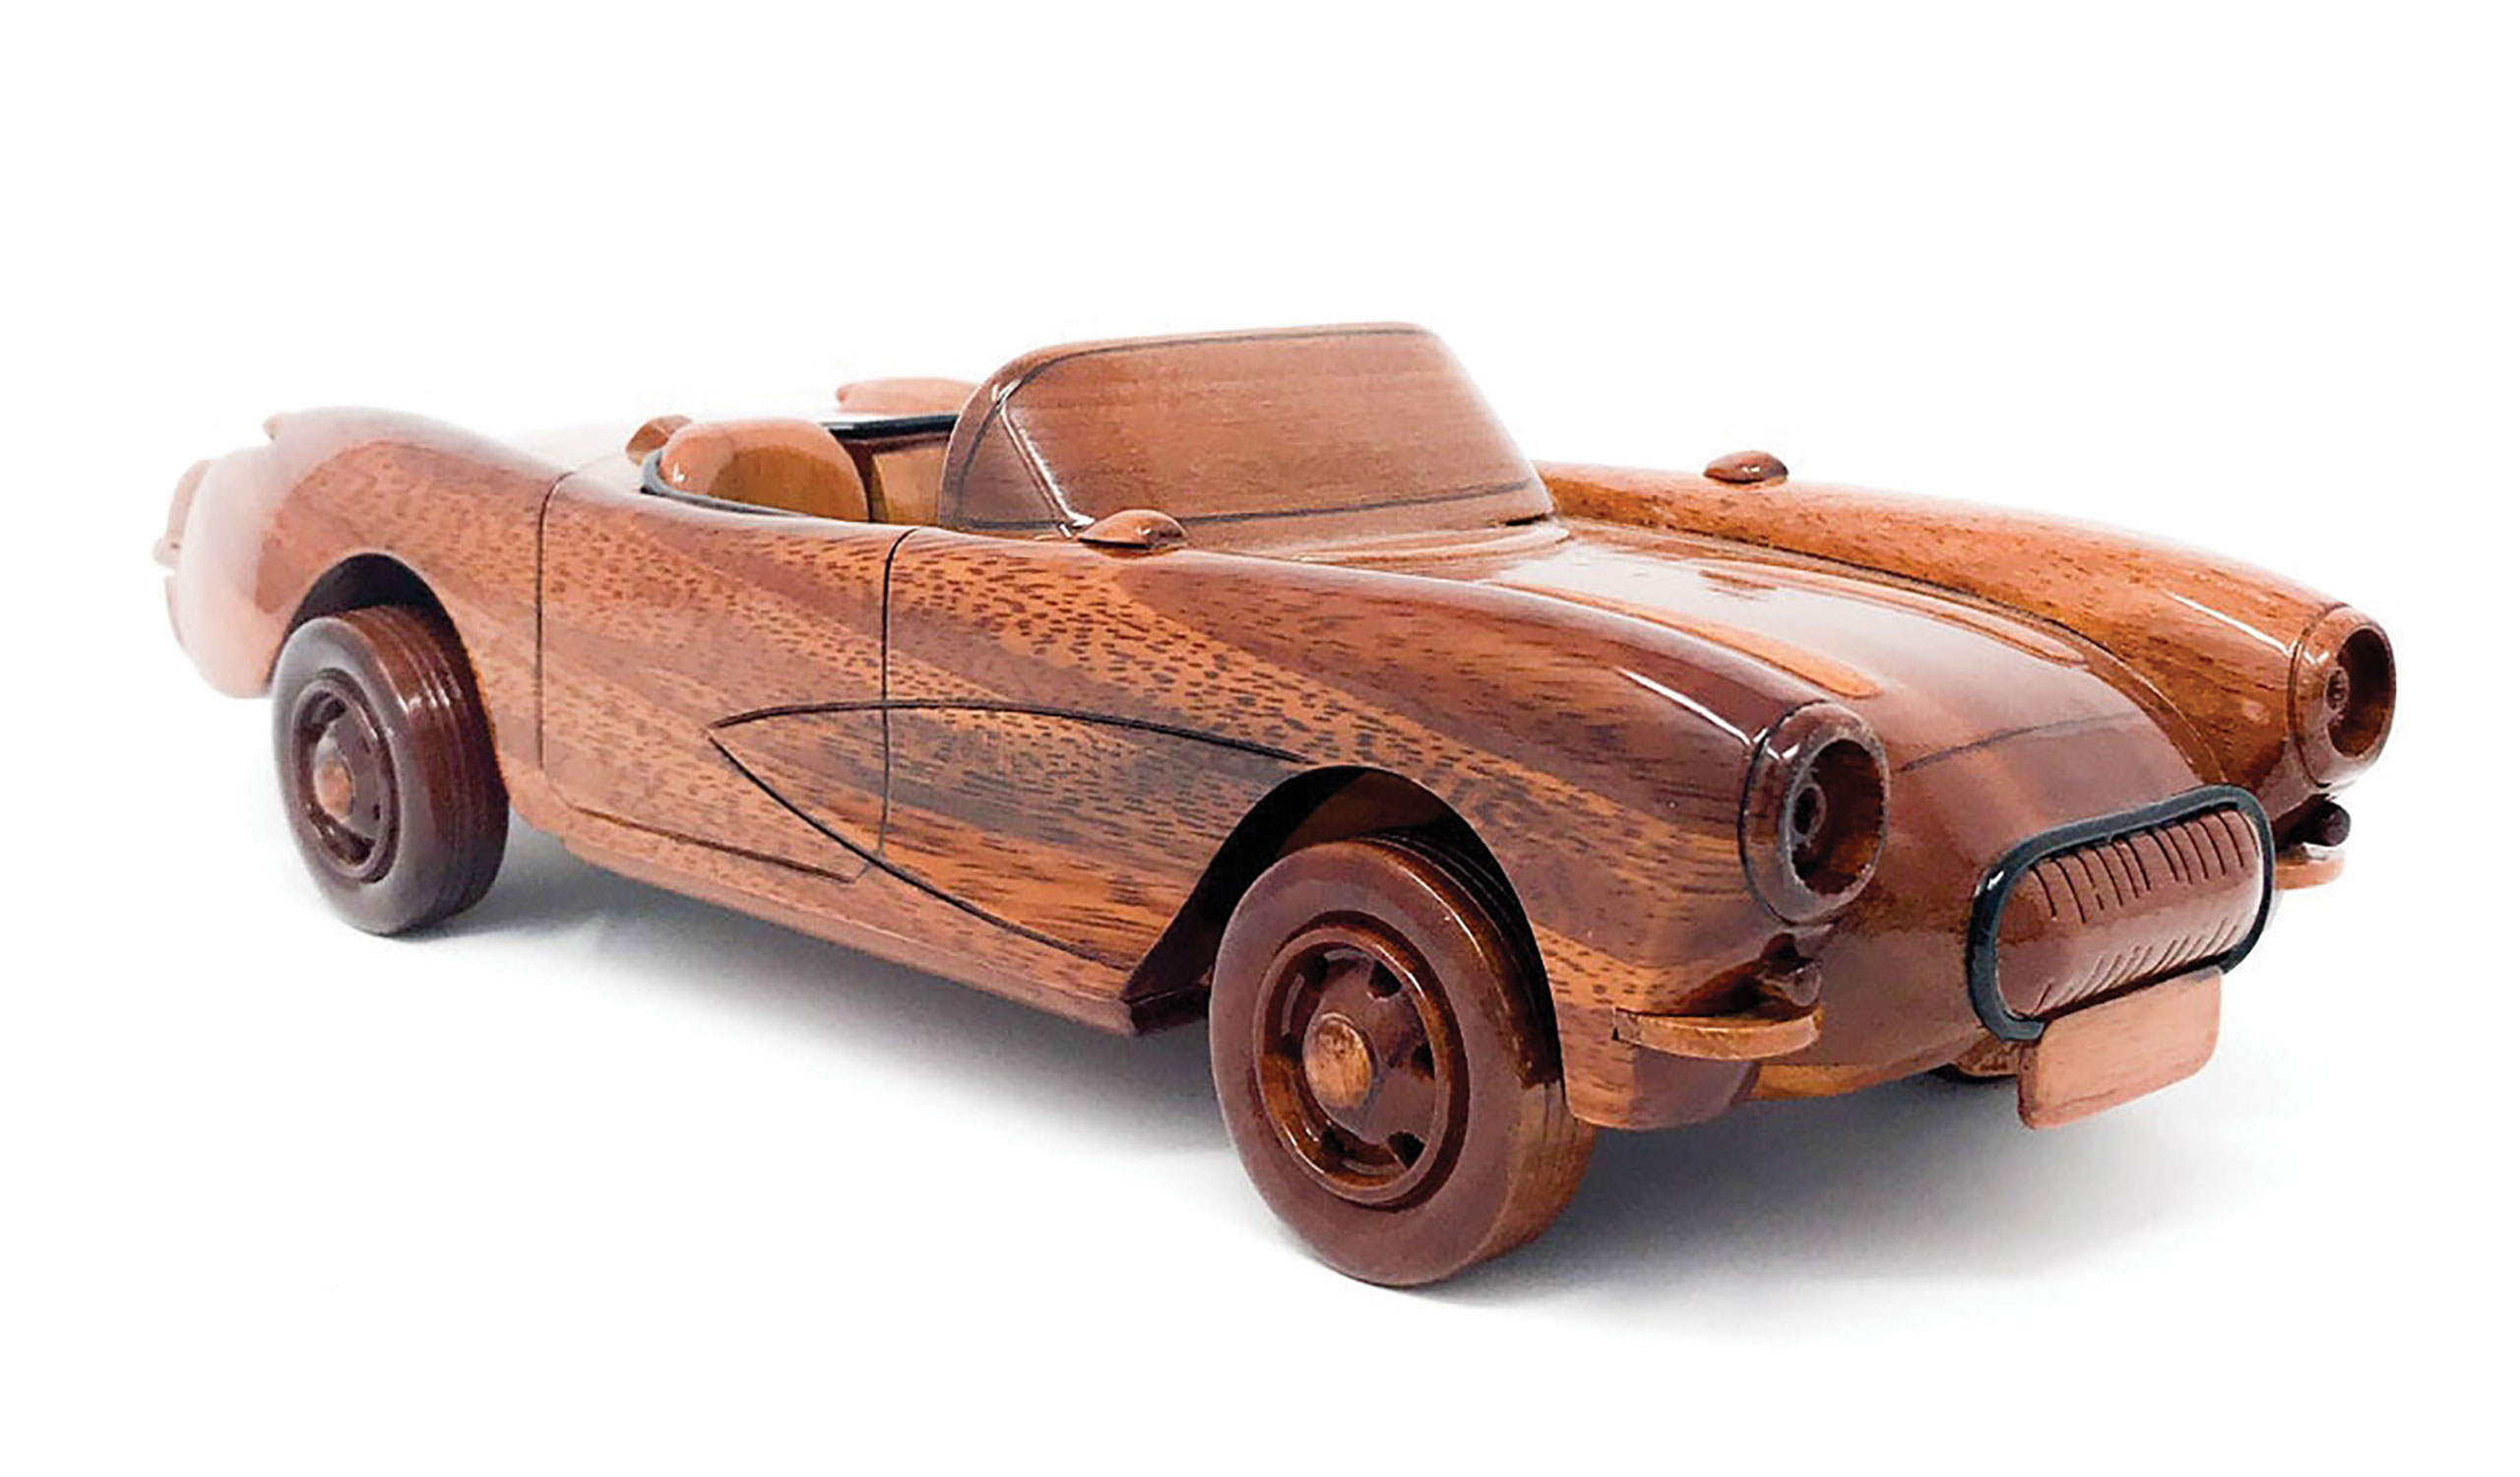 Hand Crafted And Assembled Mahogany Model For 1956-1957 Corvette